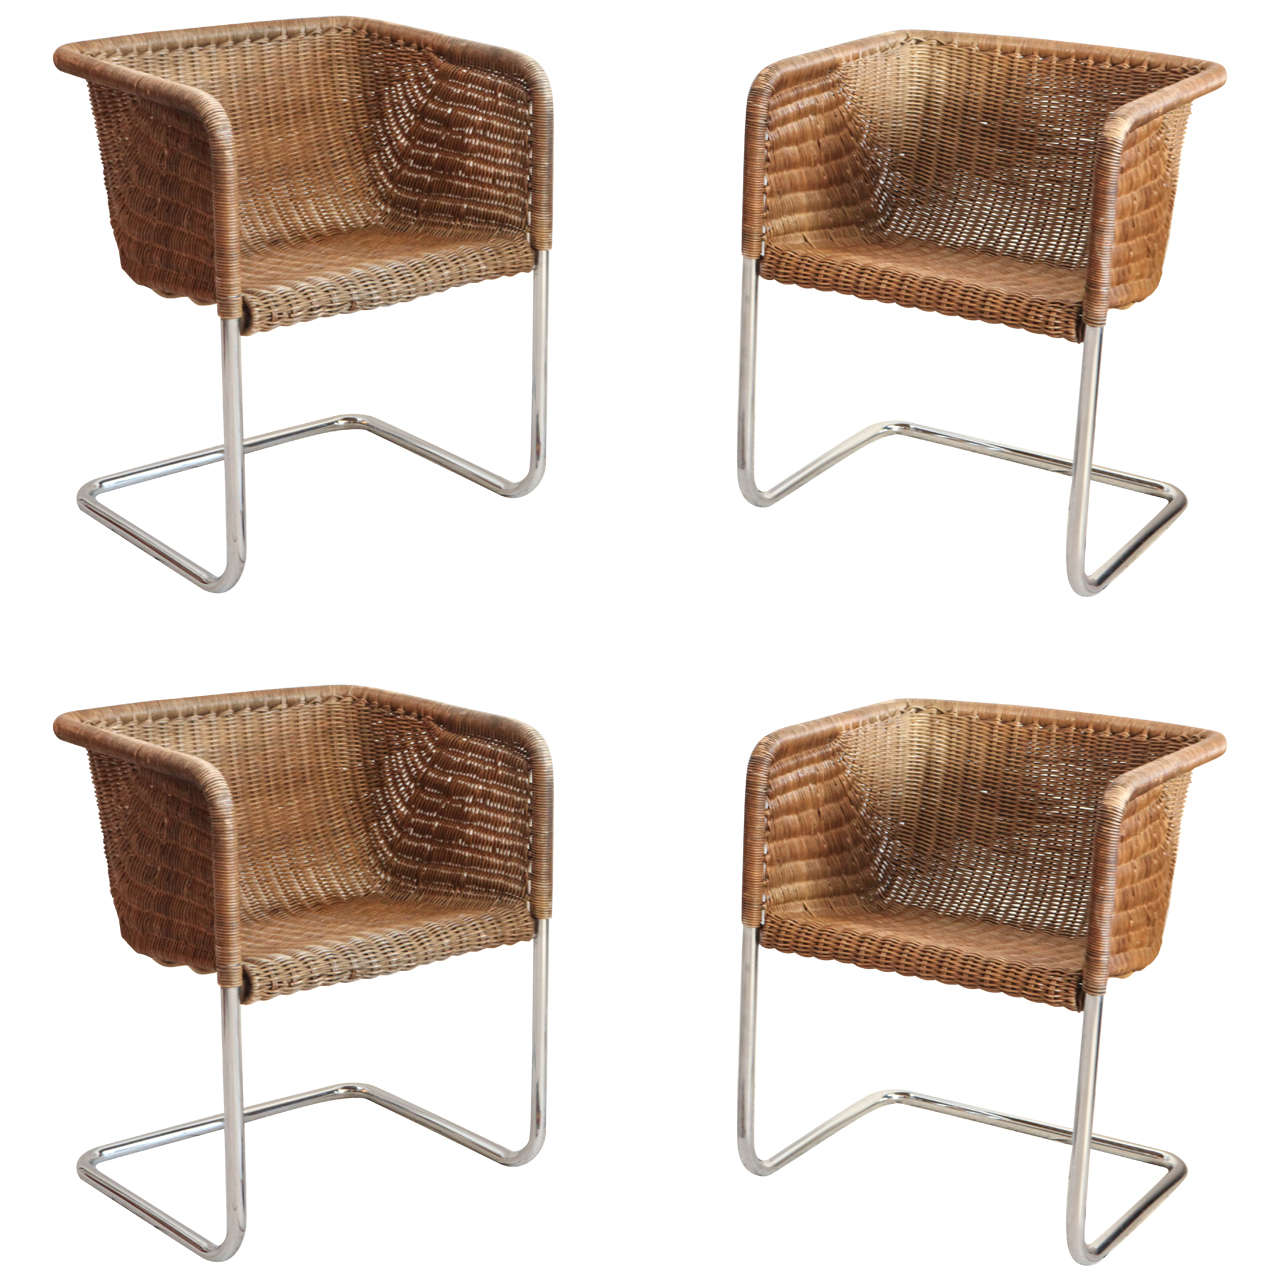 Harvey Probber Wicker and Chrome Dining Chairs at 1stdibs